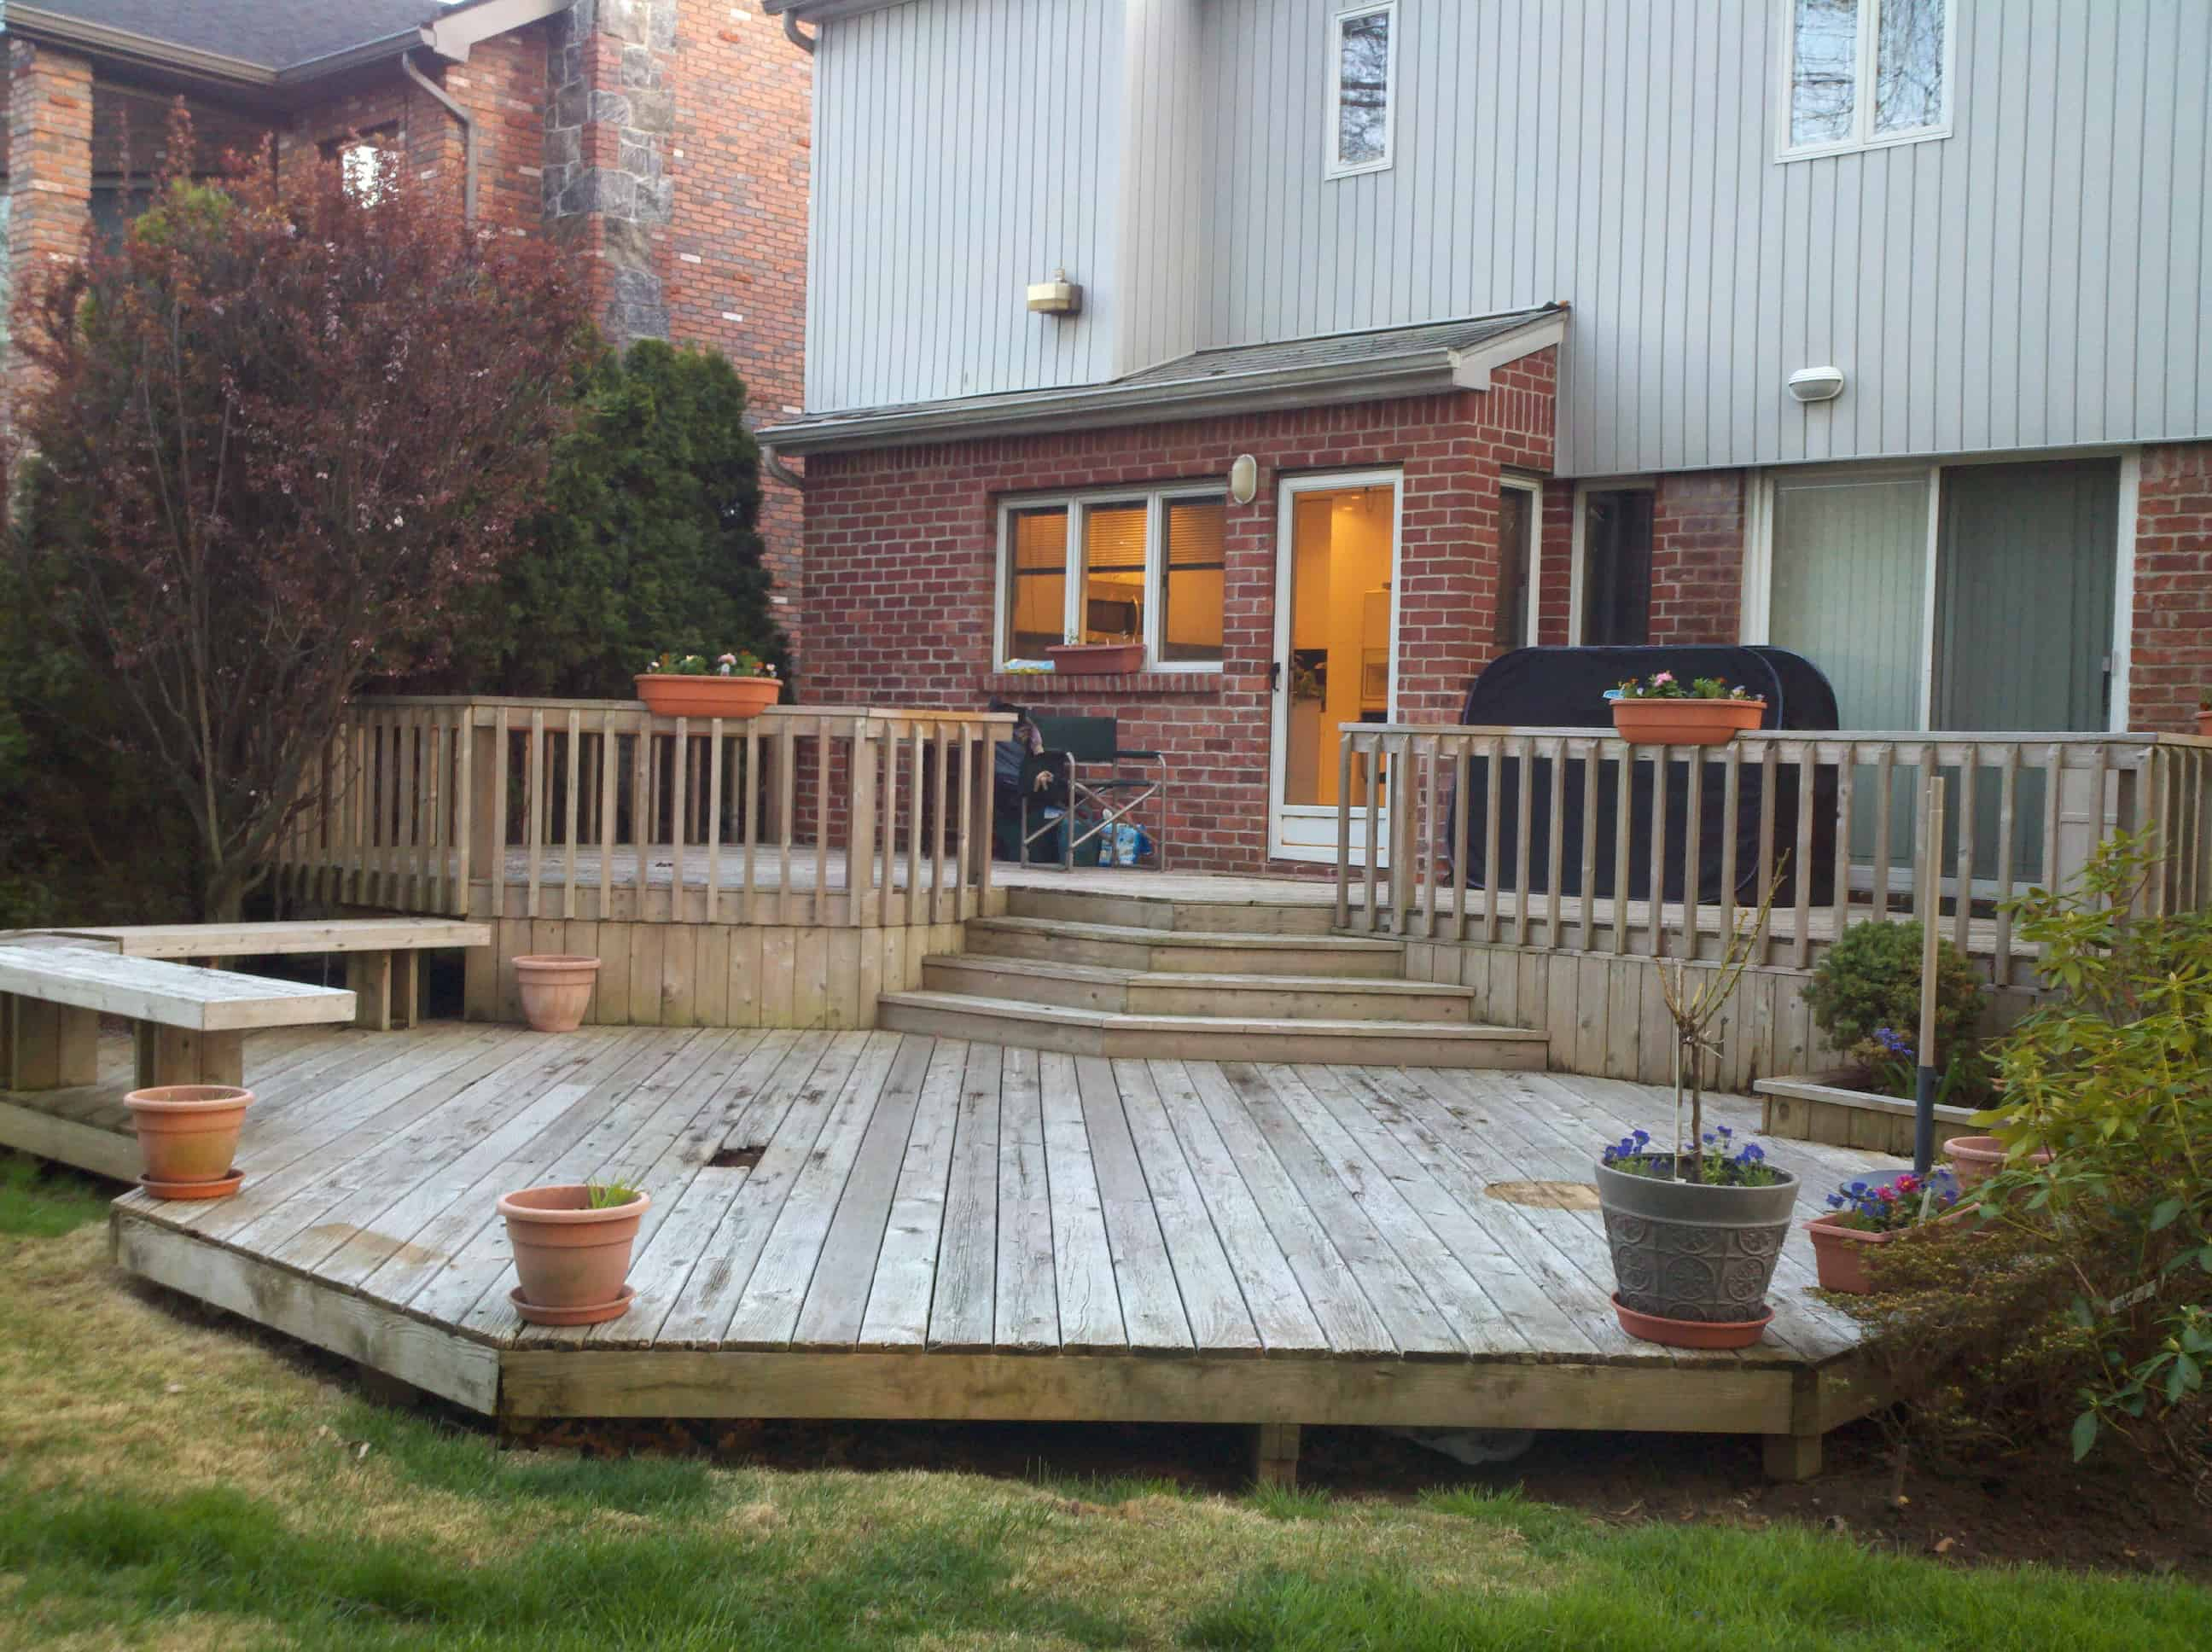 12.SIMPHOME.COM backyard patio ideas on a budget completed with 10 ideas how to makeover cheap backyard deck ideas